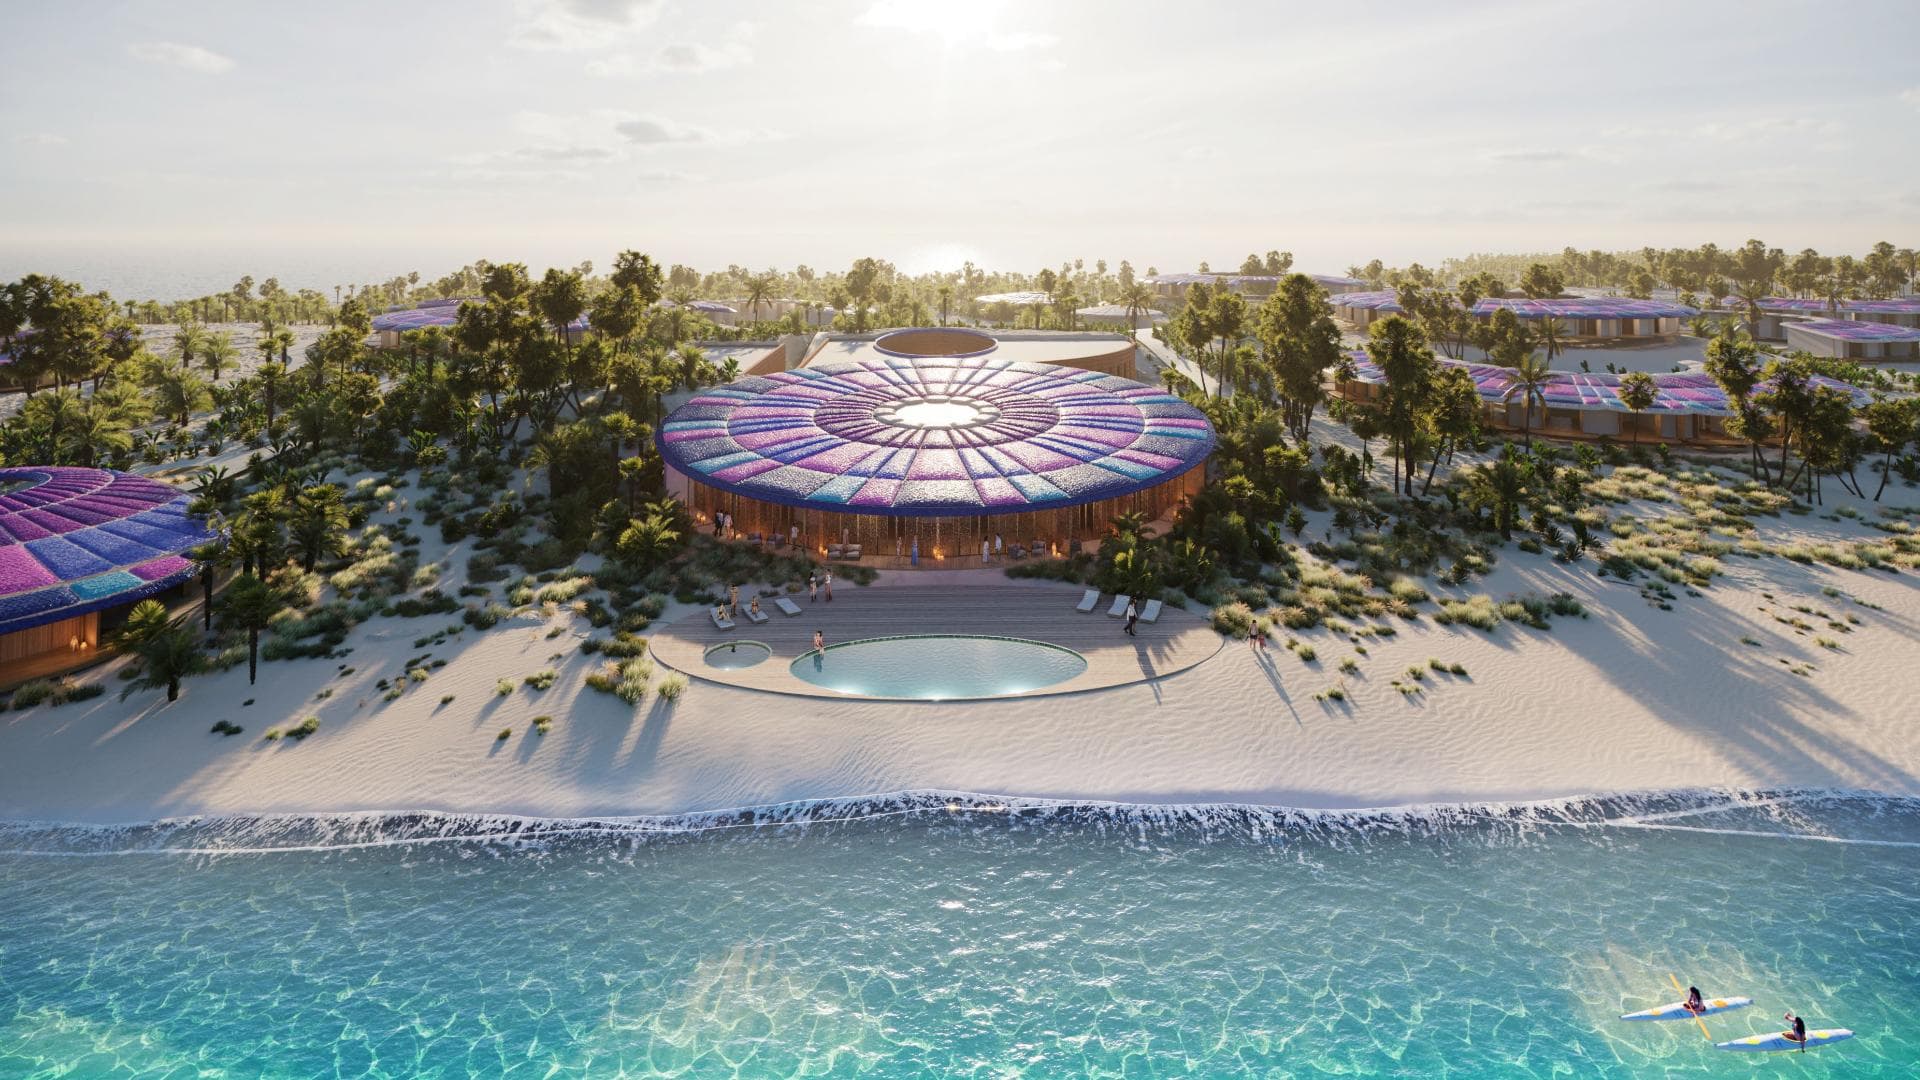 The Red Sea Project: A Luxury Resort Destination